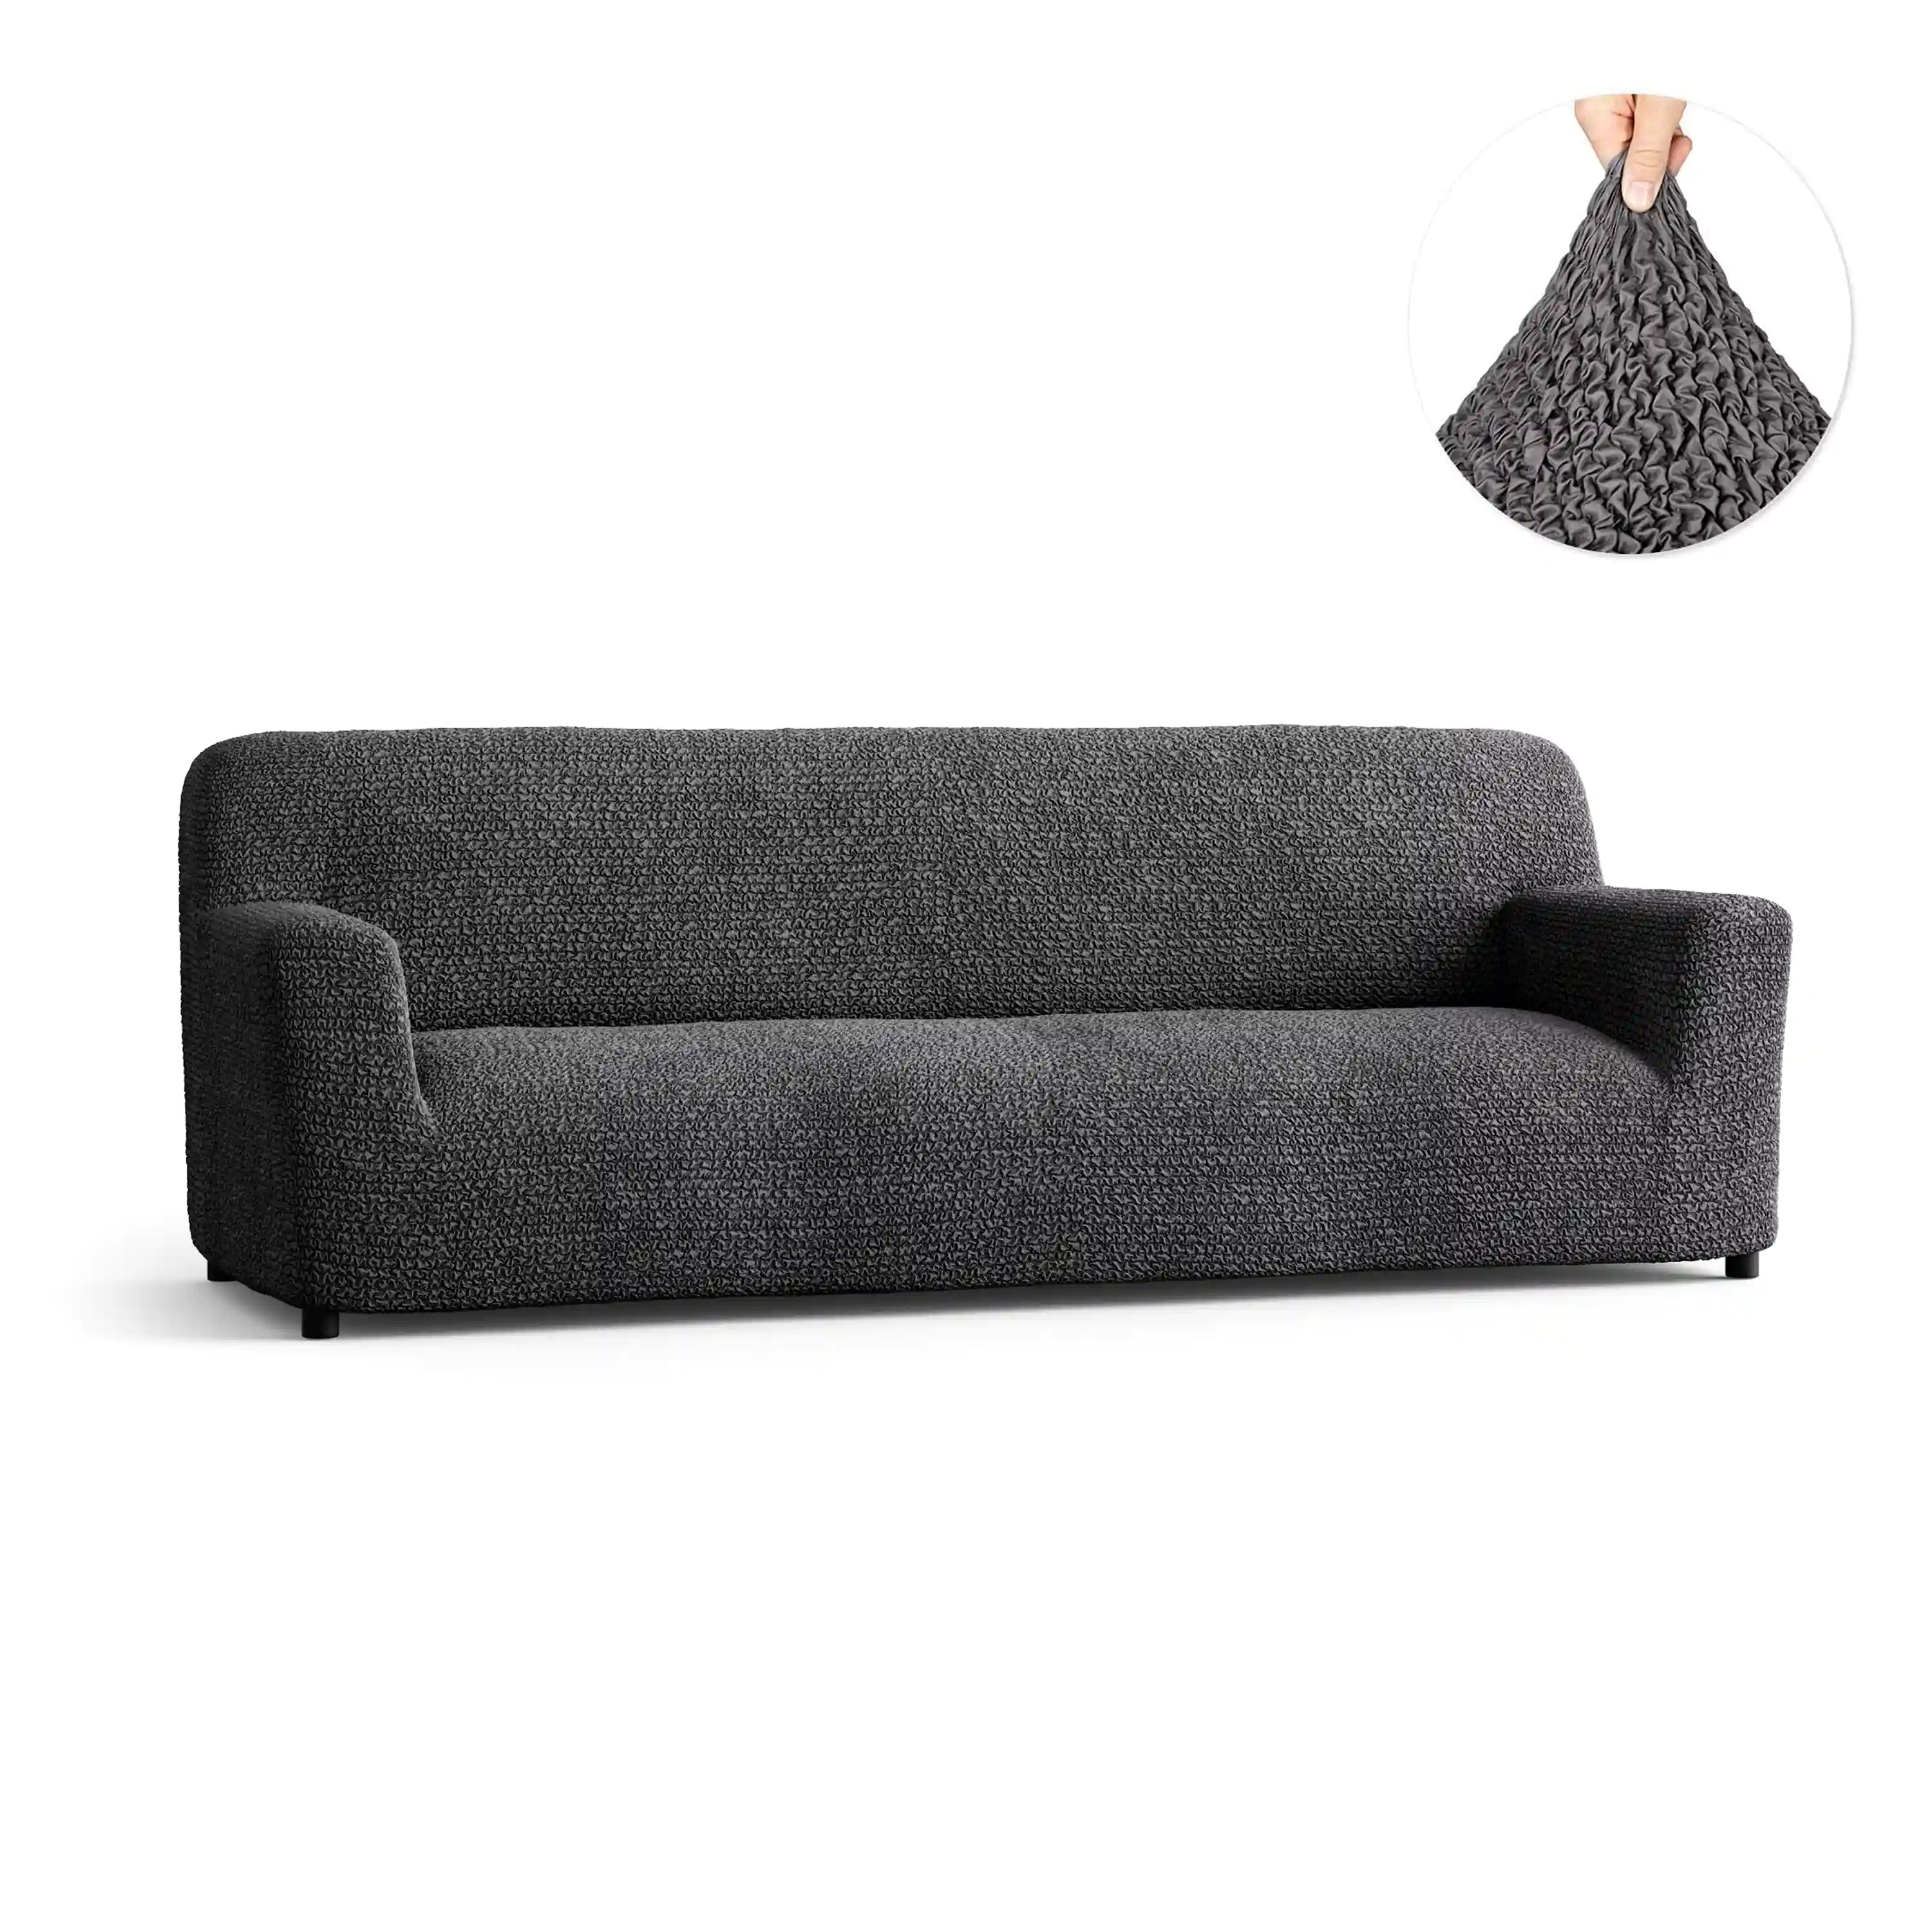 4 Seater Sofa Cover - Charcoal, Microfibra Collection